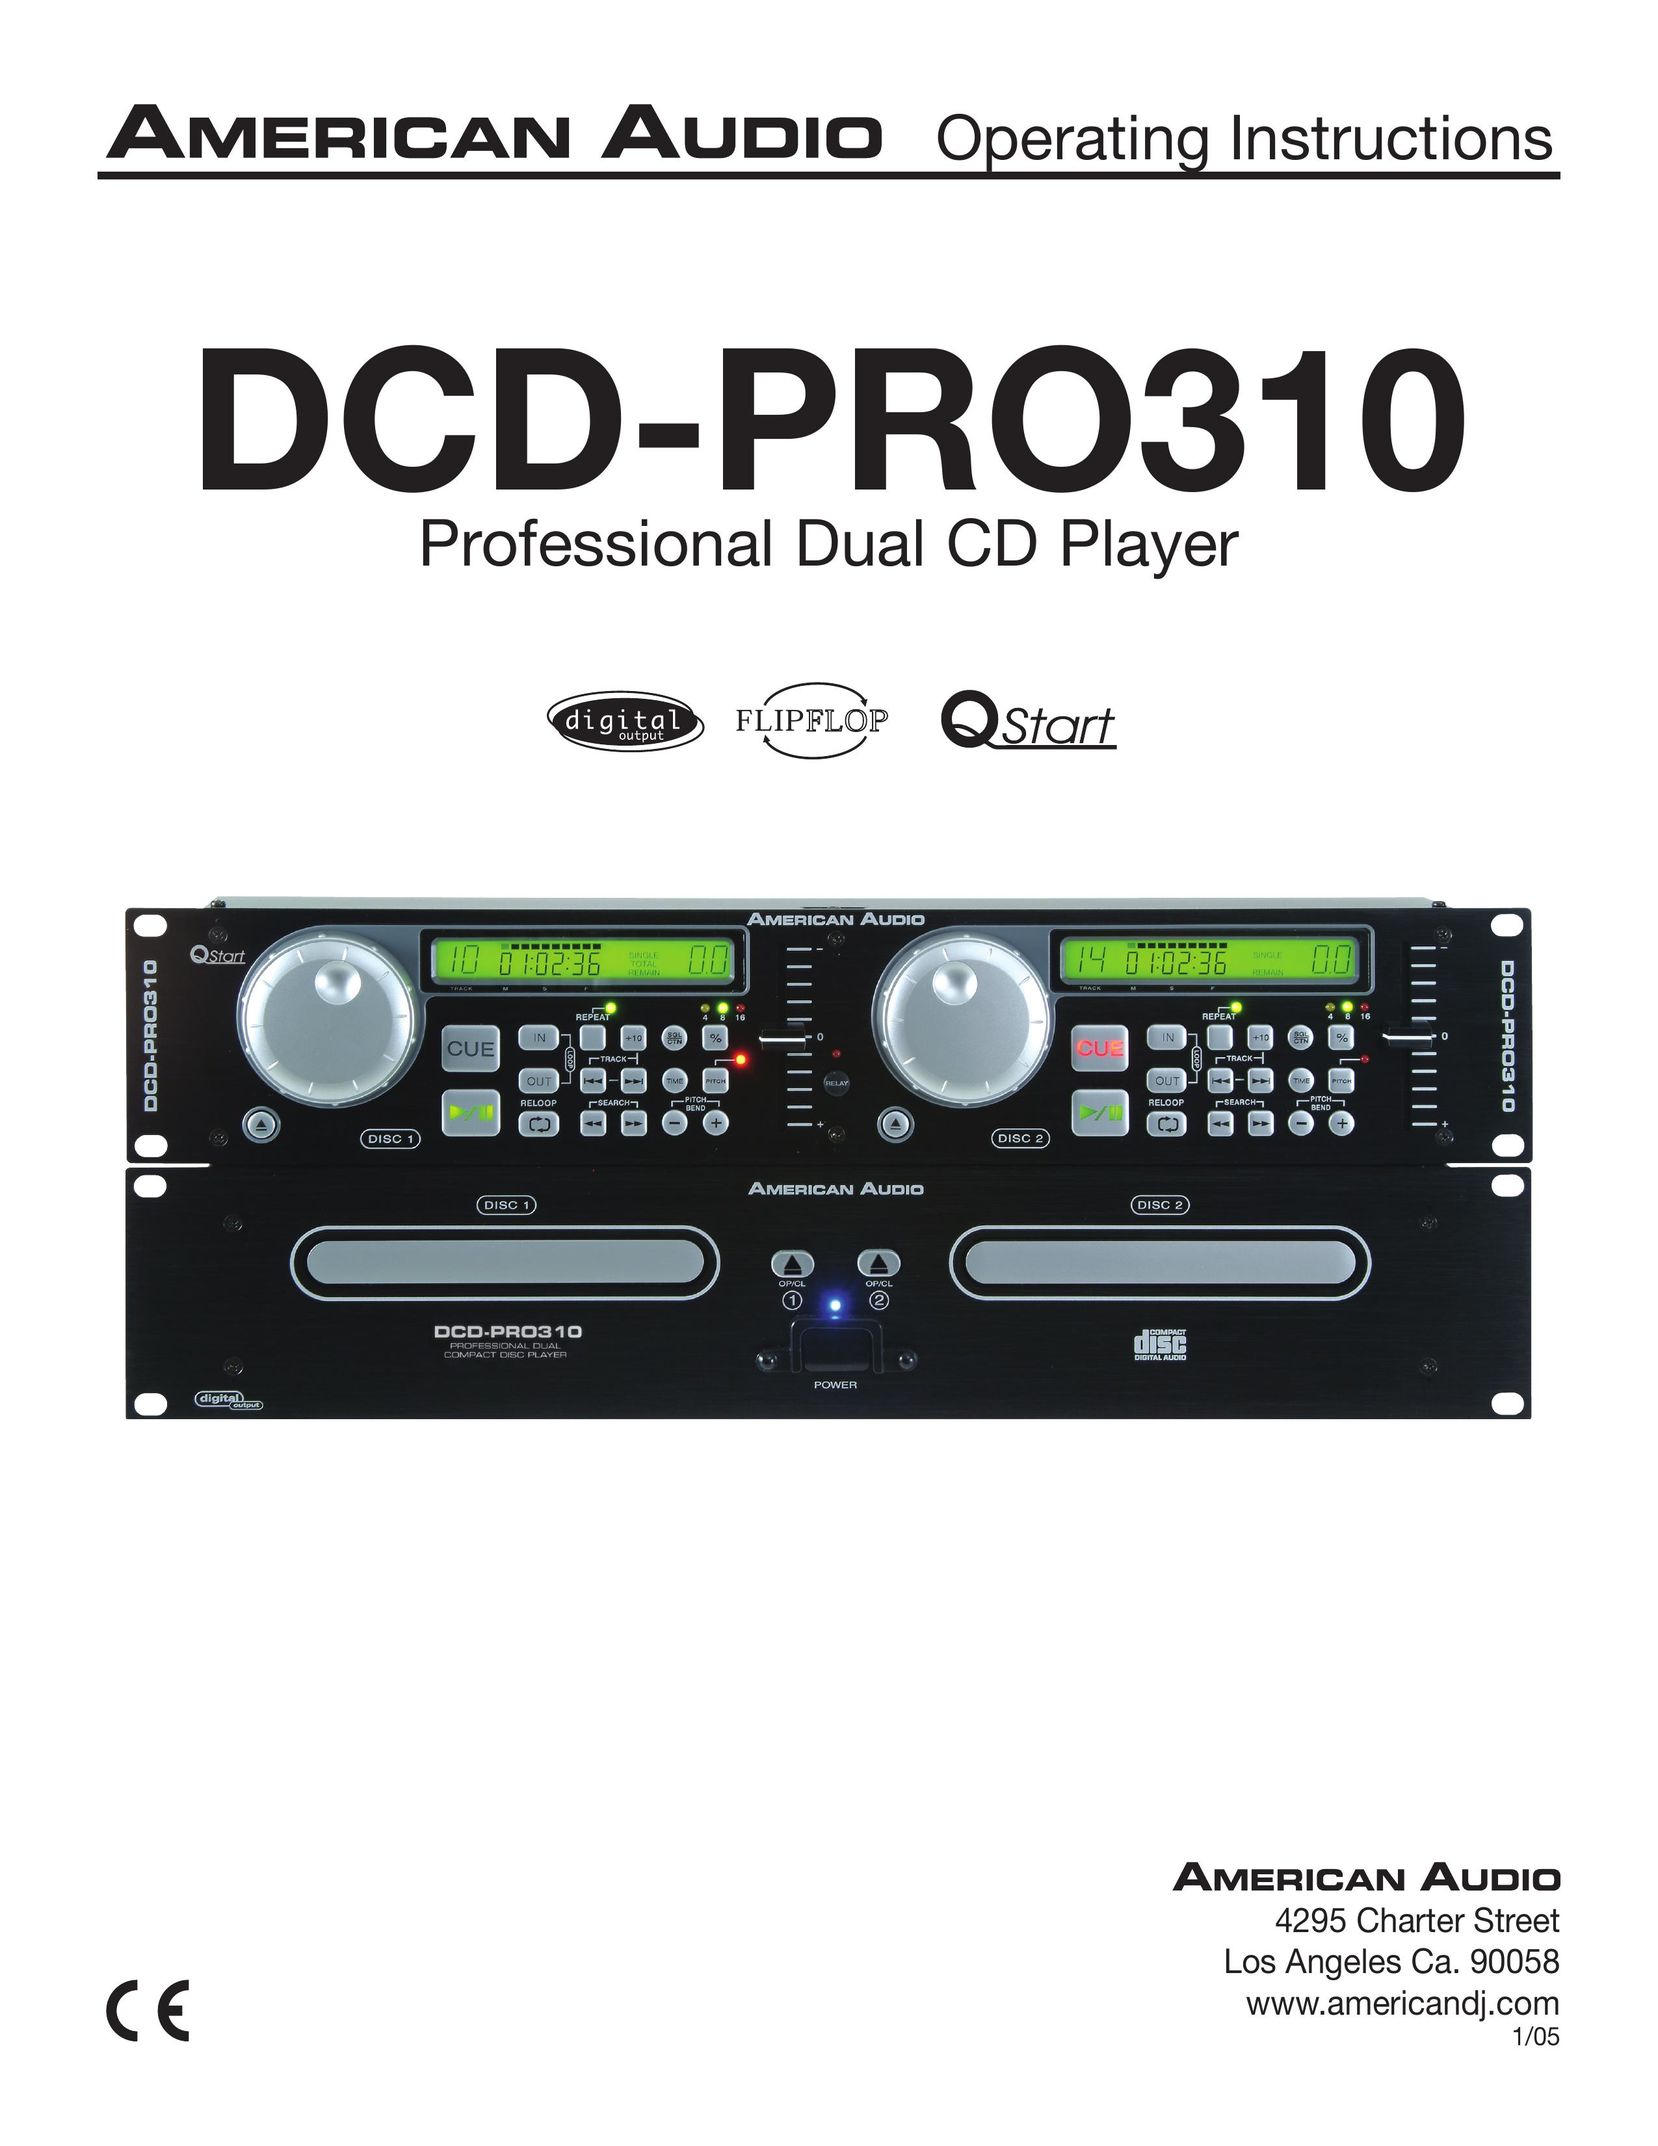 American Audio DCD-PRO310 CD Player User Manual (Page 1)